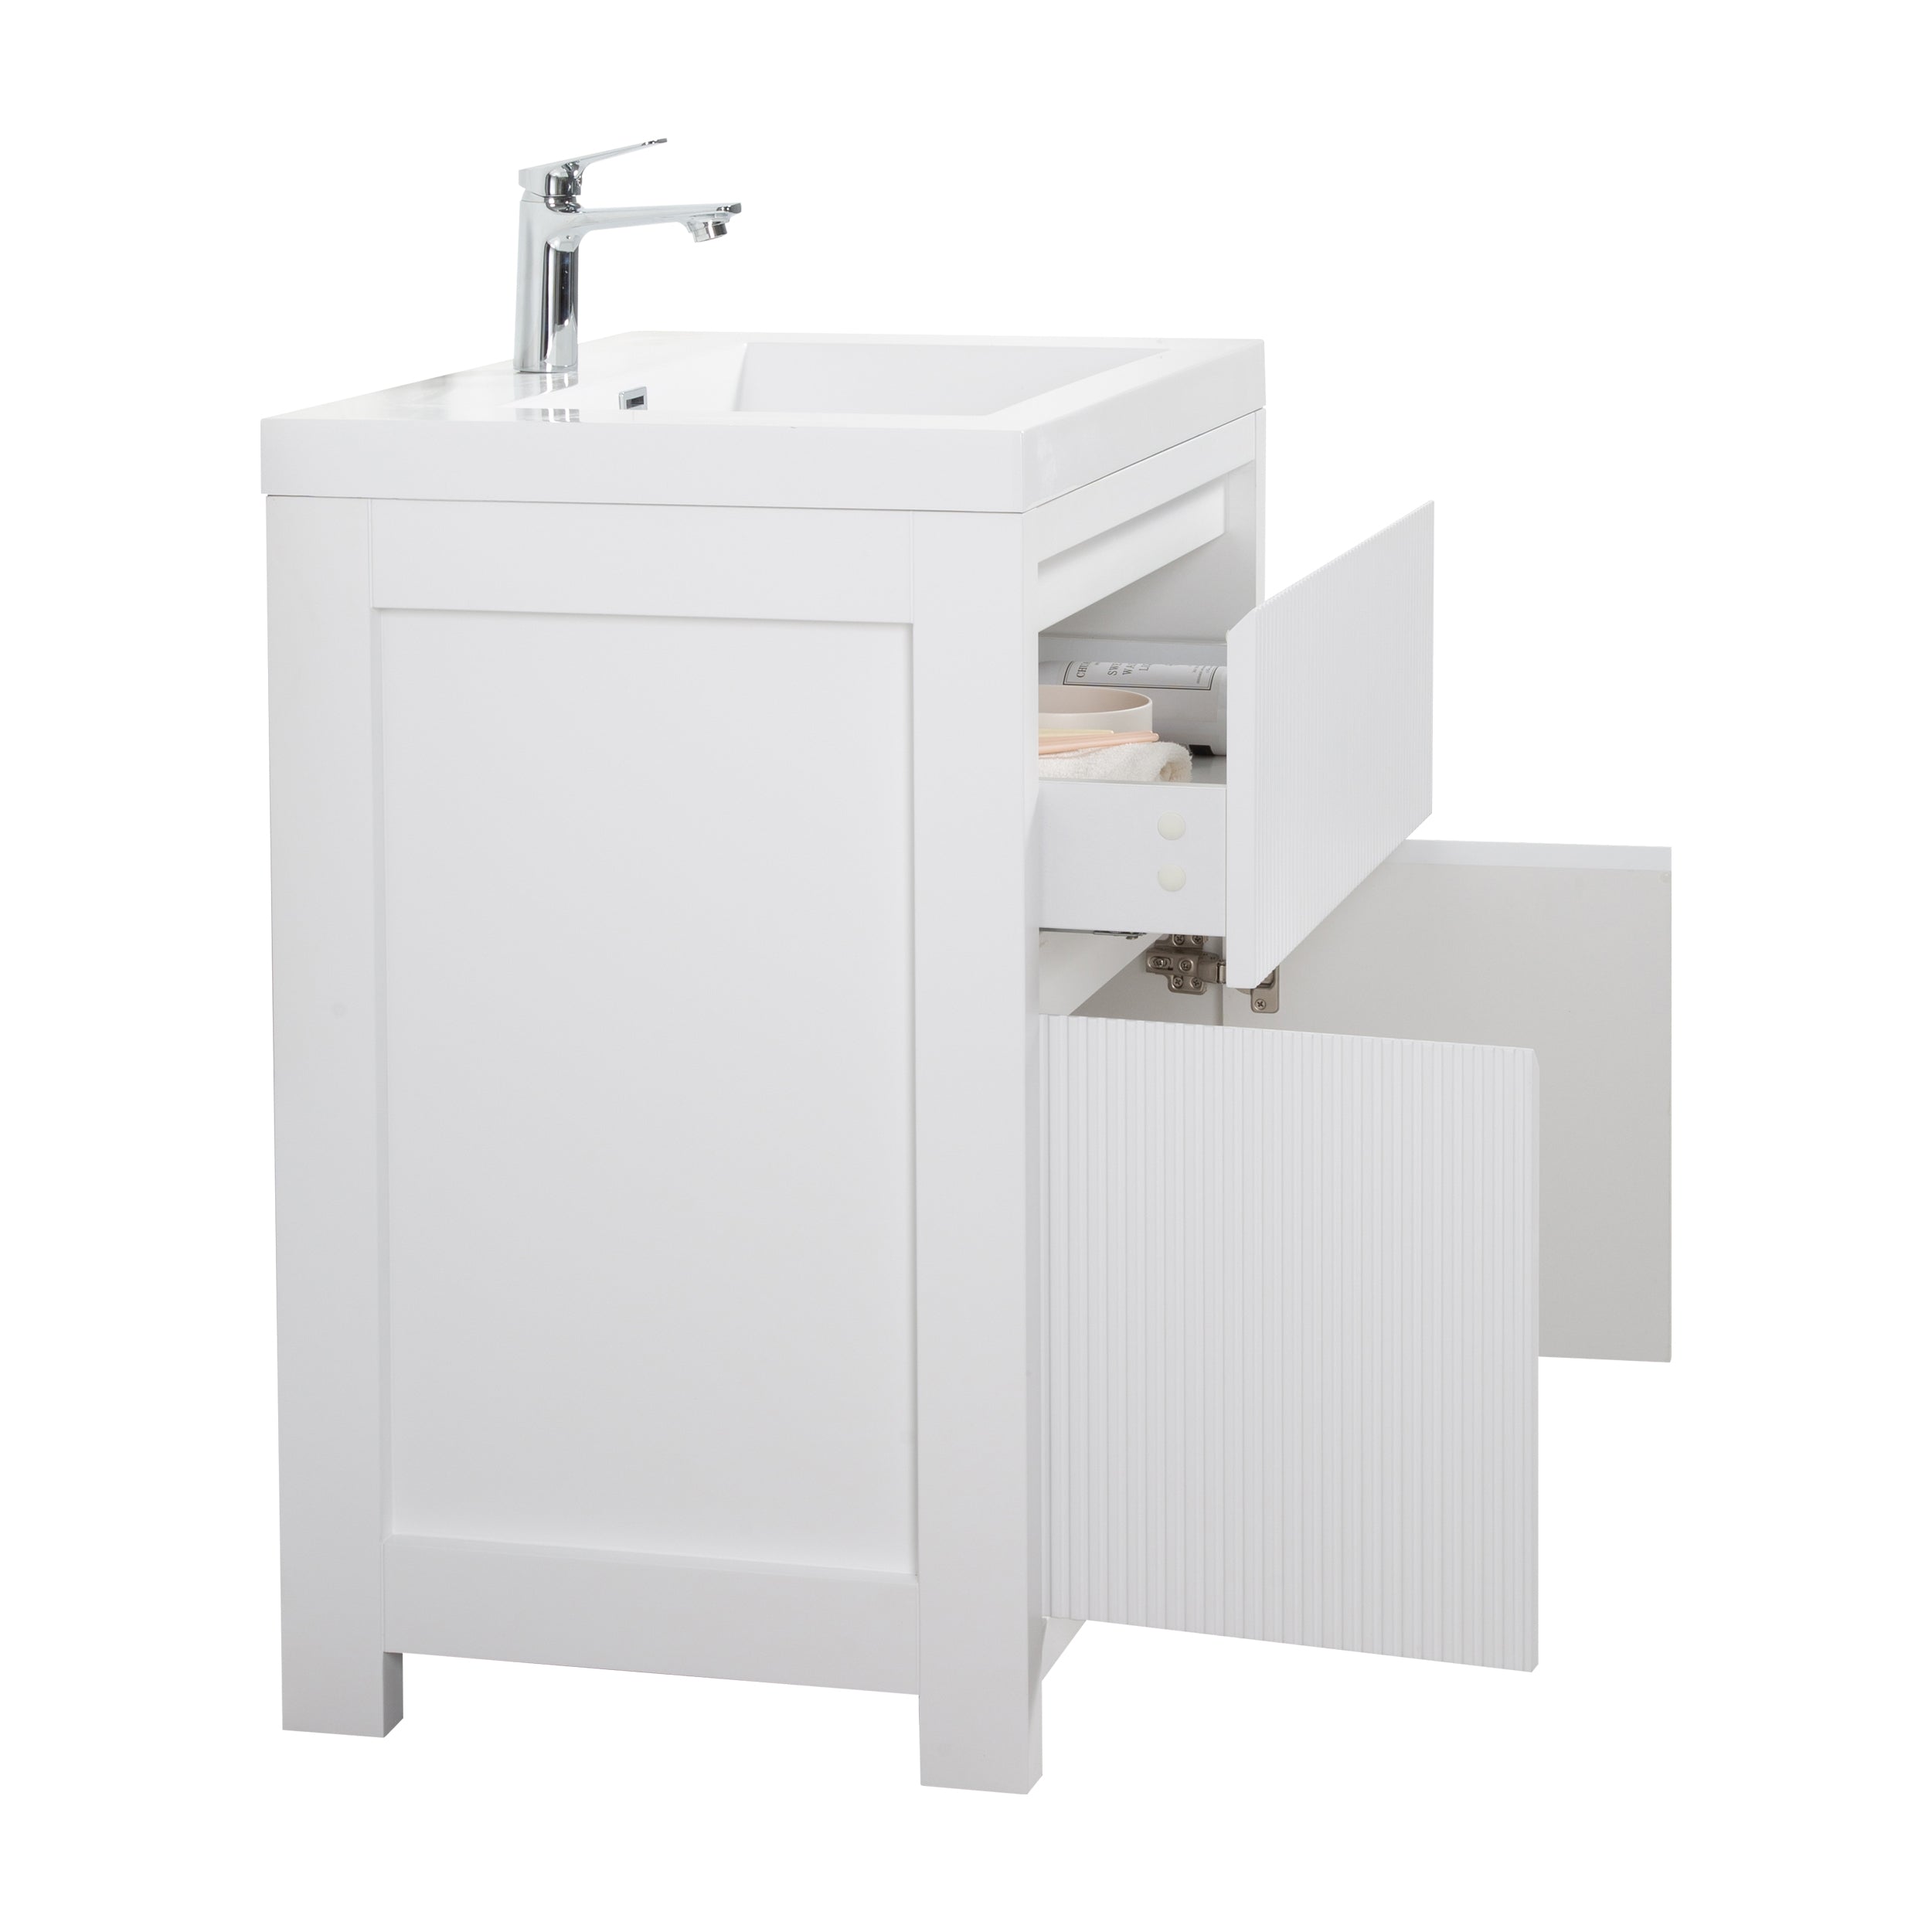 Neos 23.5 Matte White Cabinet, Square Cultured Marble Sink, Free Standing Modern Vanity Set